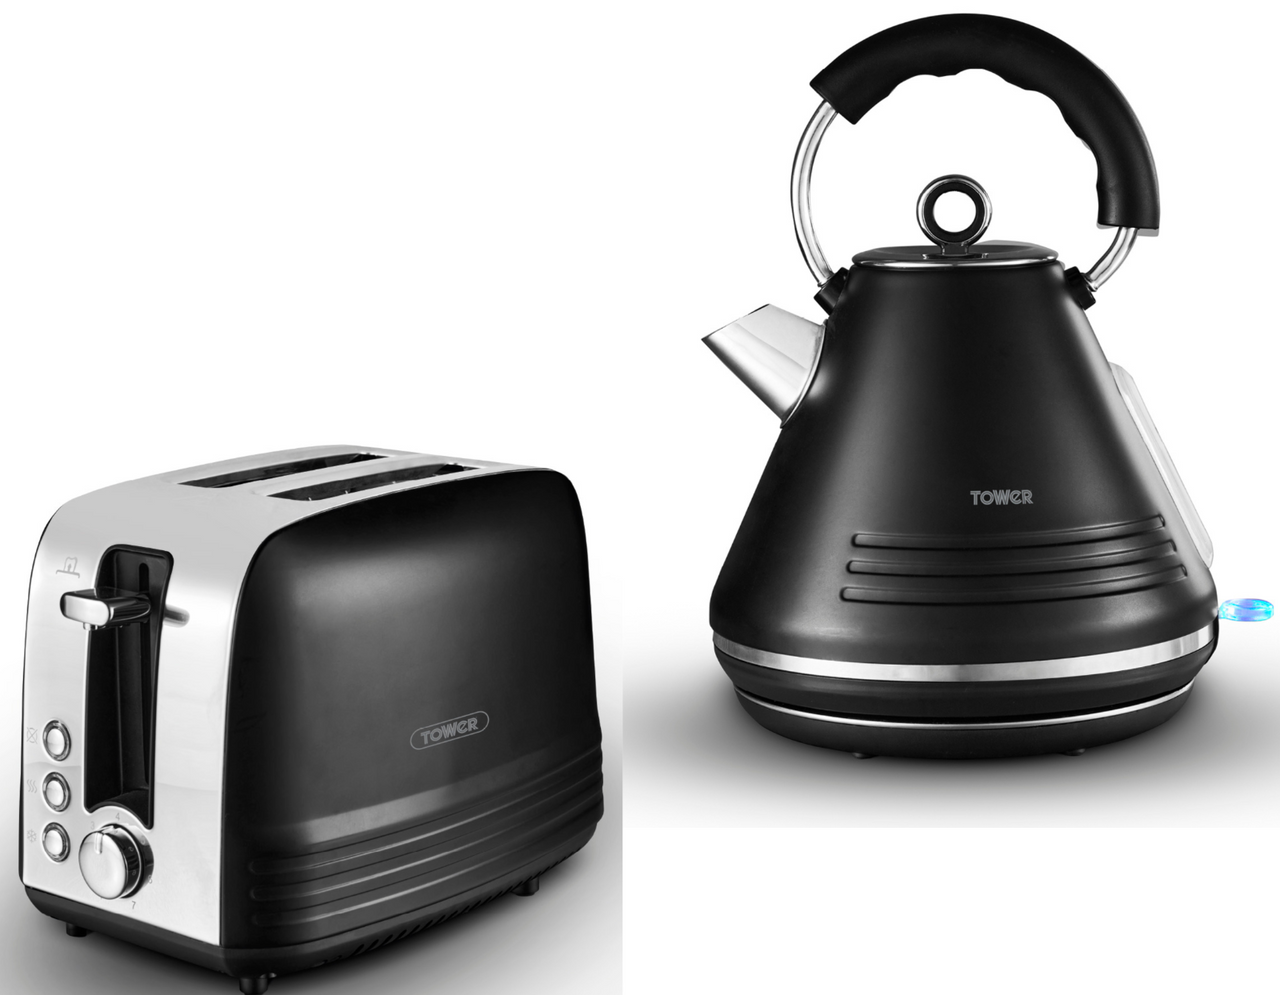 Tower Ash Black 1.7L 3KW Pyramid Kettle & 2 Slice Toaster Contemporary Set with Chrome Accents